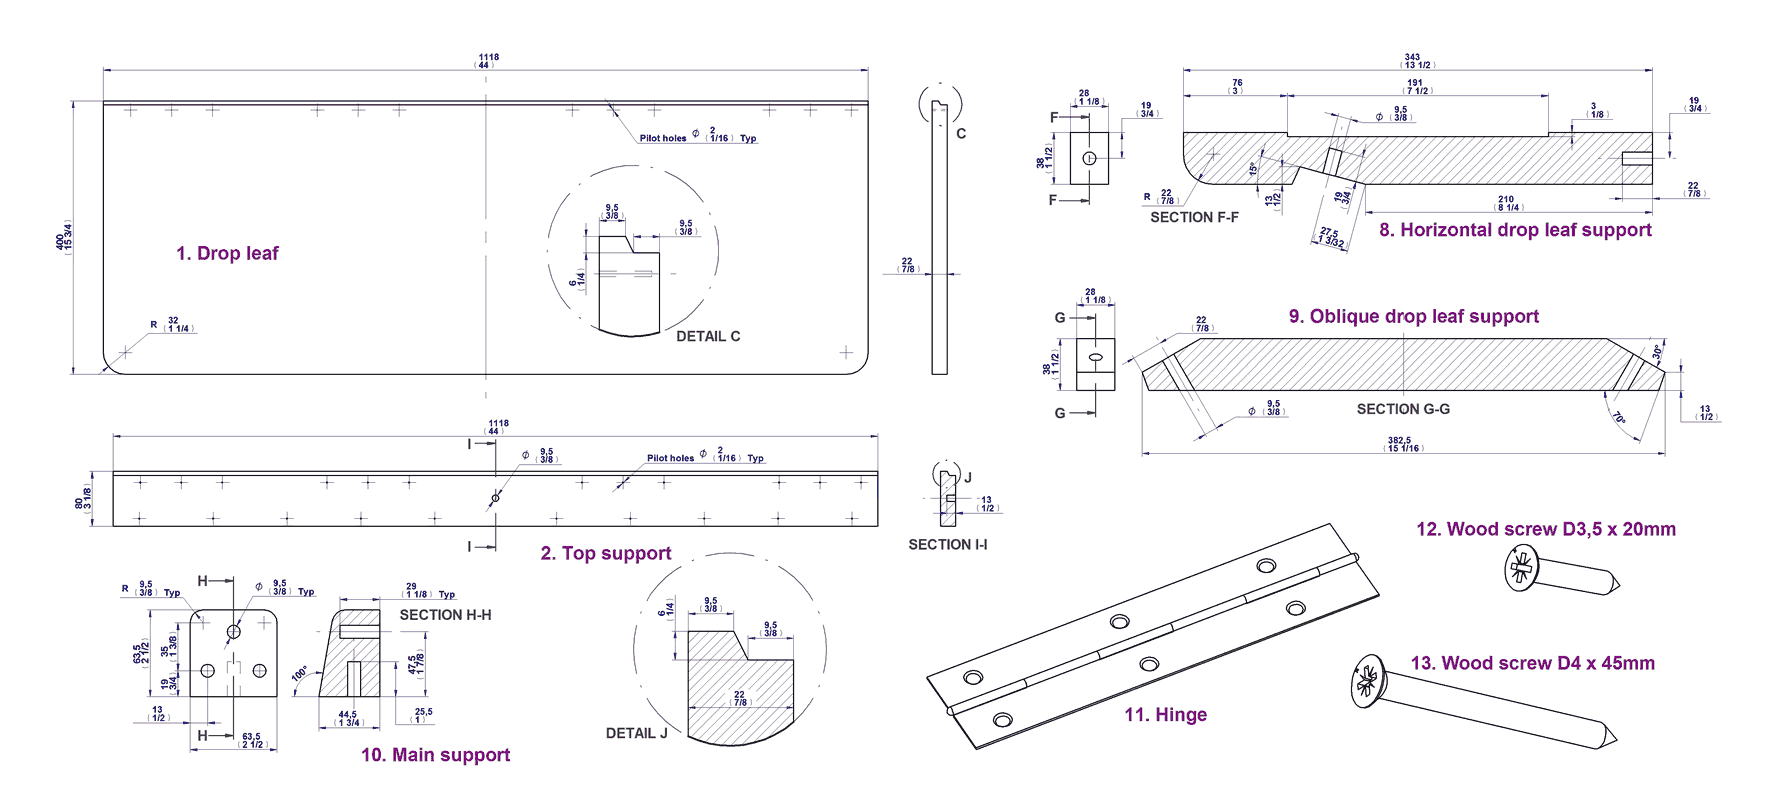 Wall-mounted drop-leaf folding table - Parts drawings 1